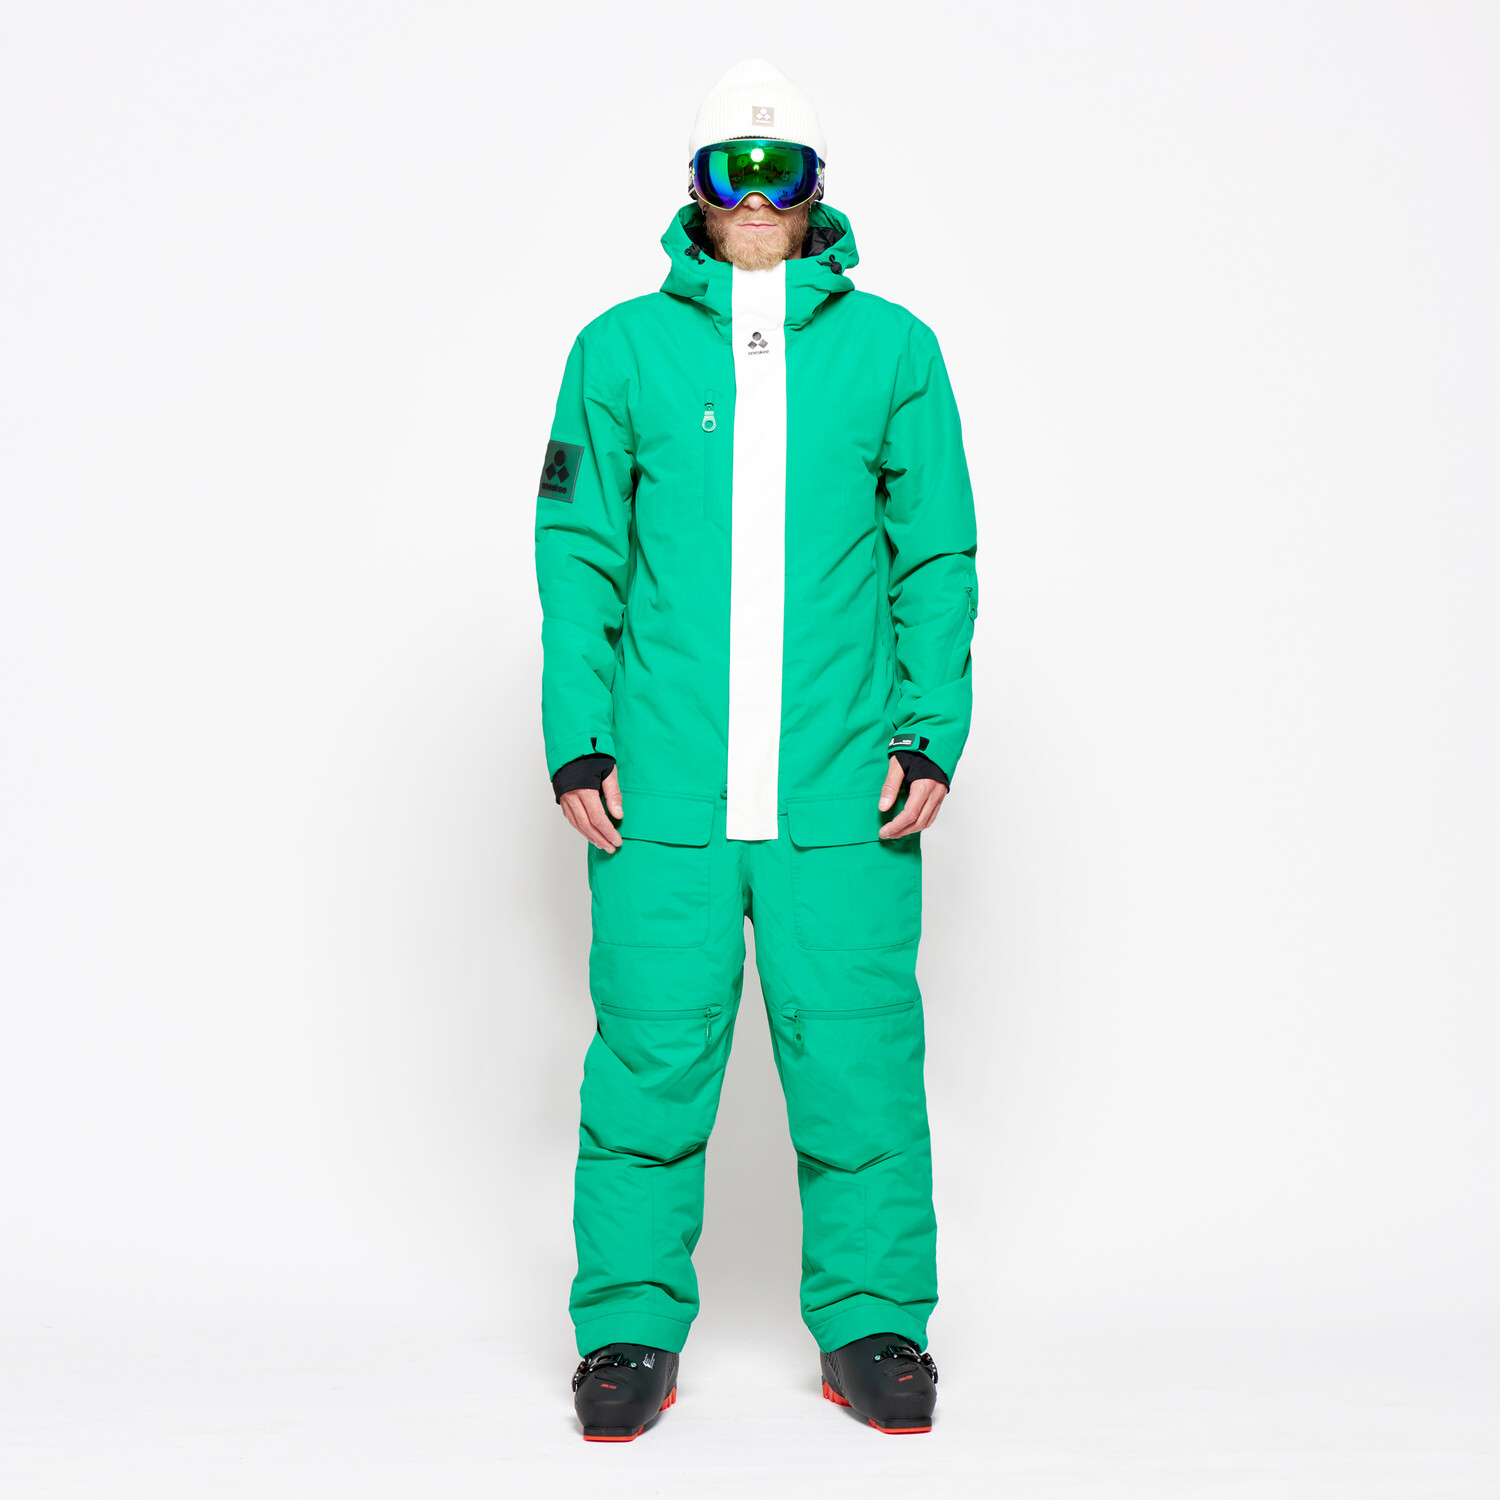 Oneskee Men's Mark VII 25k Ski Suit // Green (S) - Oneskee All-In-One Ski  Suits - Touch of Modern